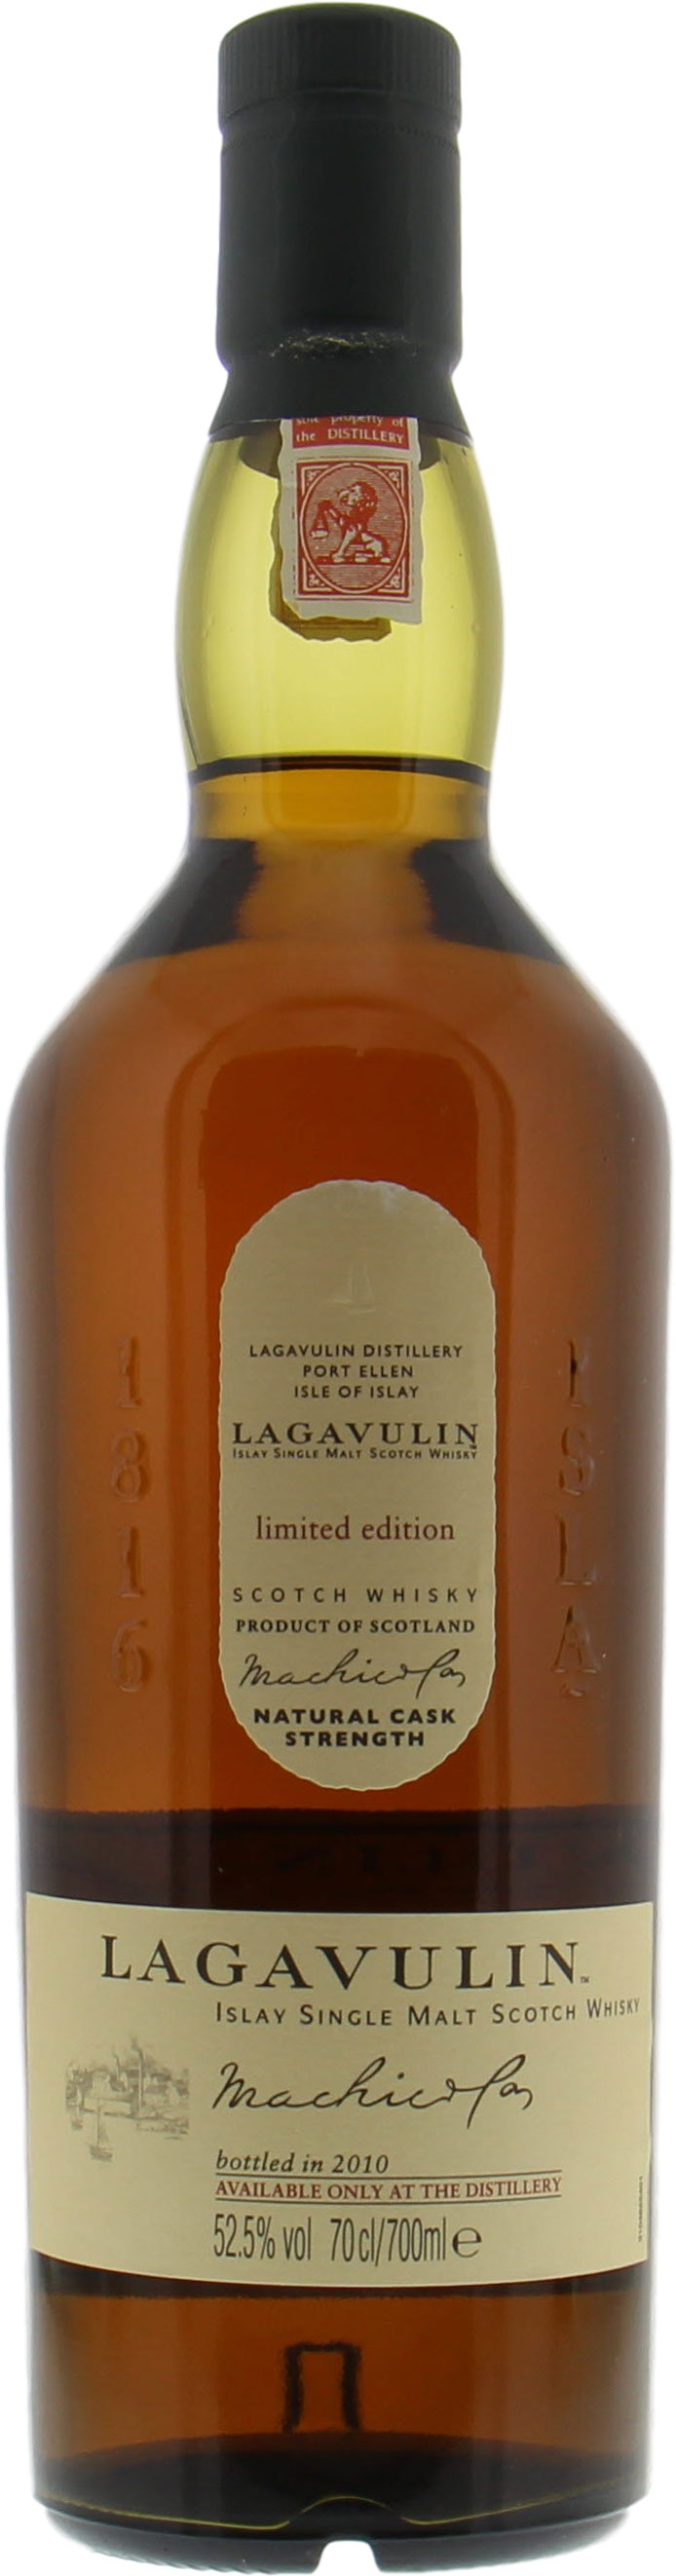 Lagavulin - Only Available At Distillery 2010  52.5% NV 10001